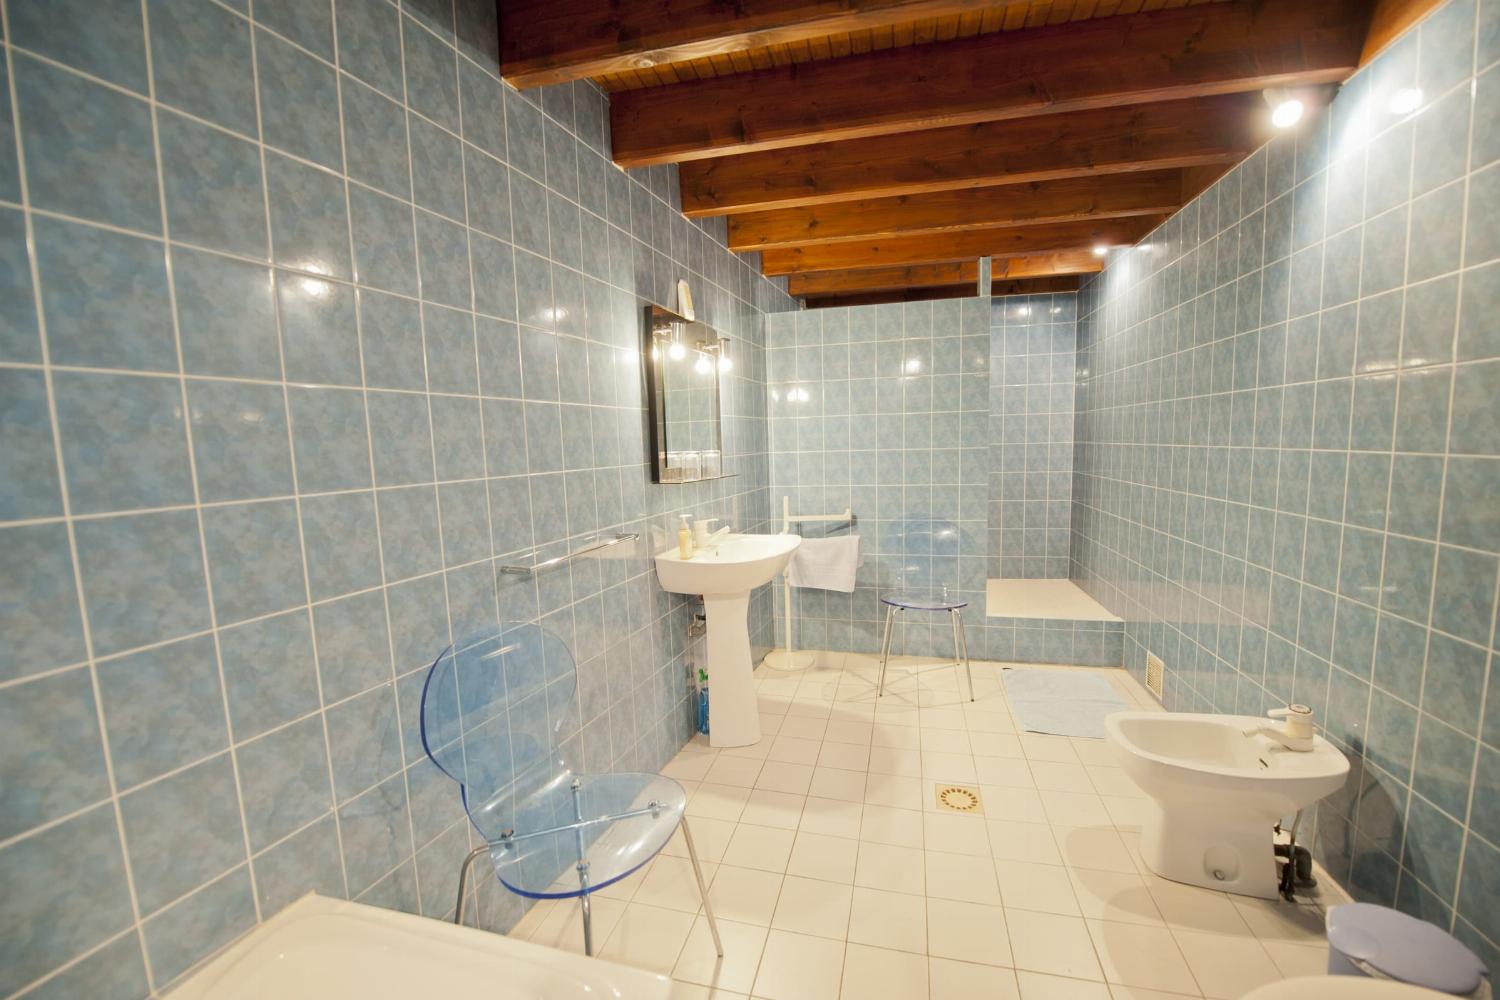 Bathroom | Self-catering home in Charente